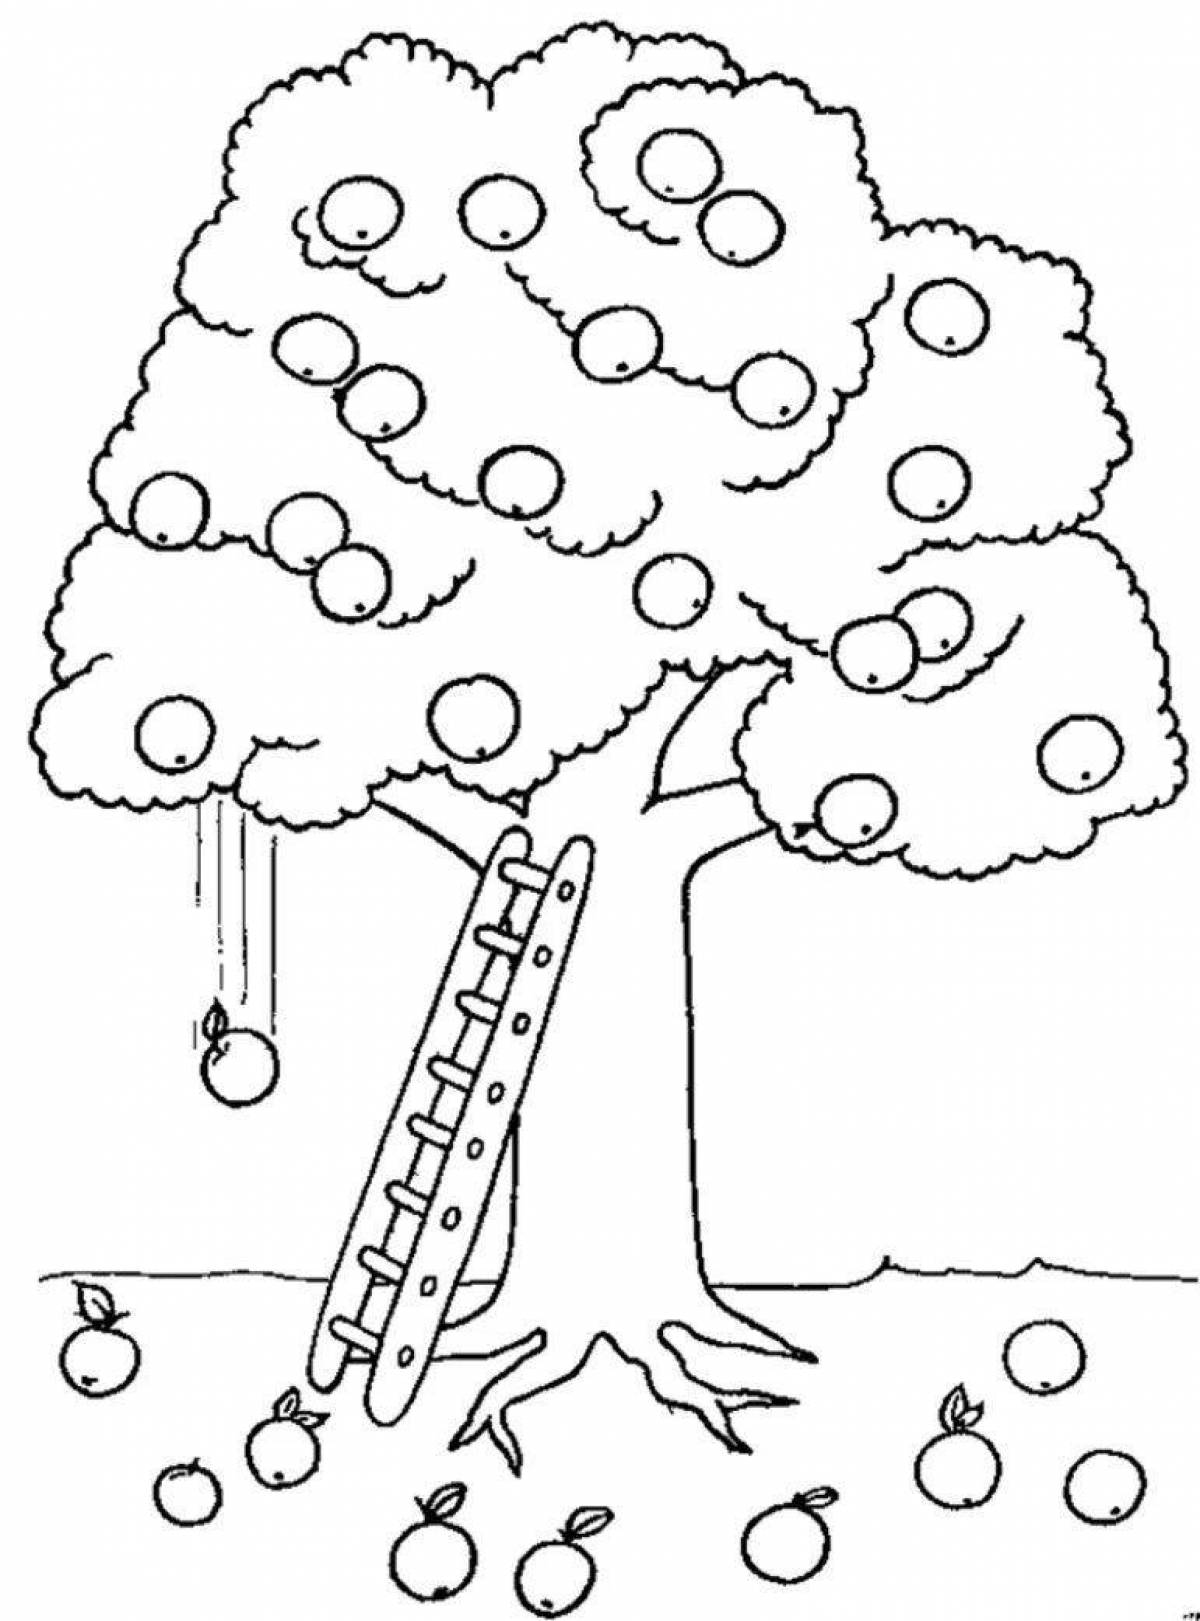 Apple tree refreshing coloring book